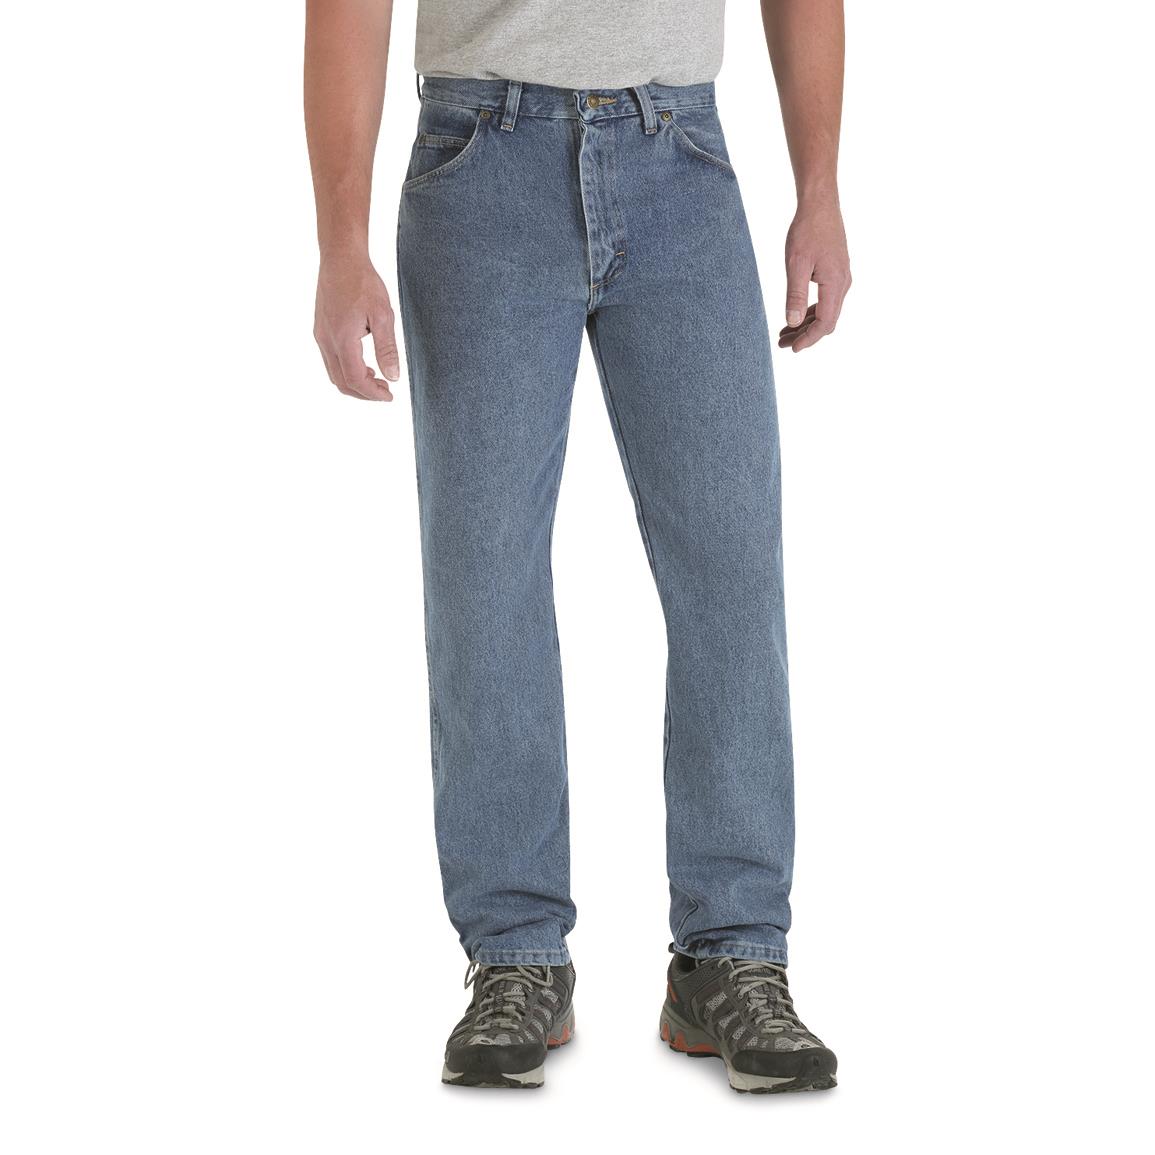 Men's Wrangler® Rugged Wear® Classic Fit Jeans, Stonewash